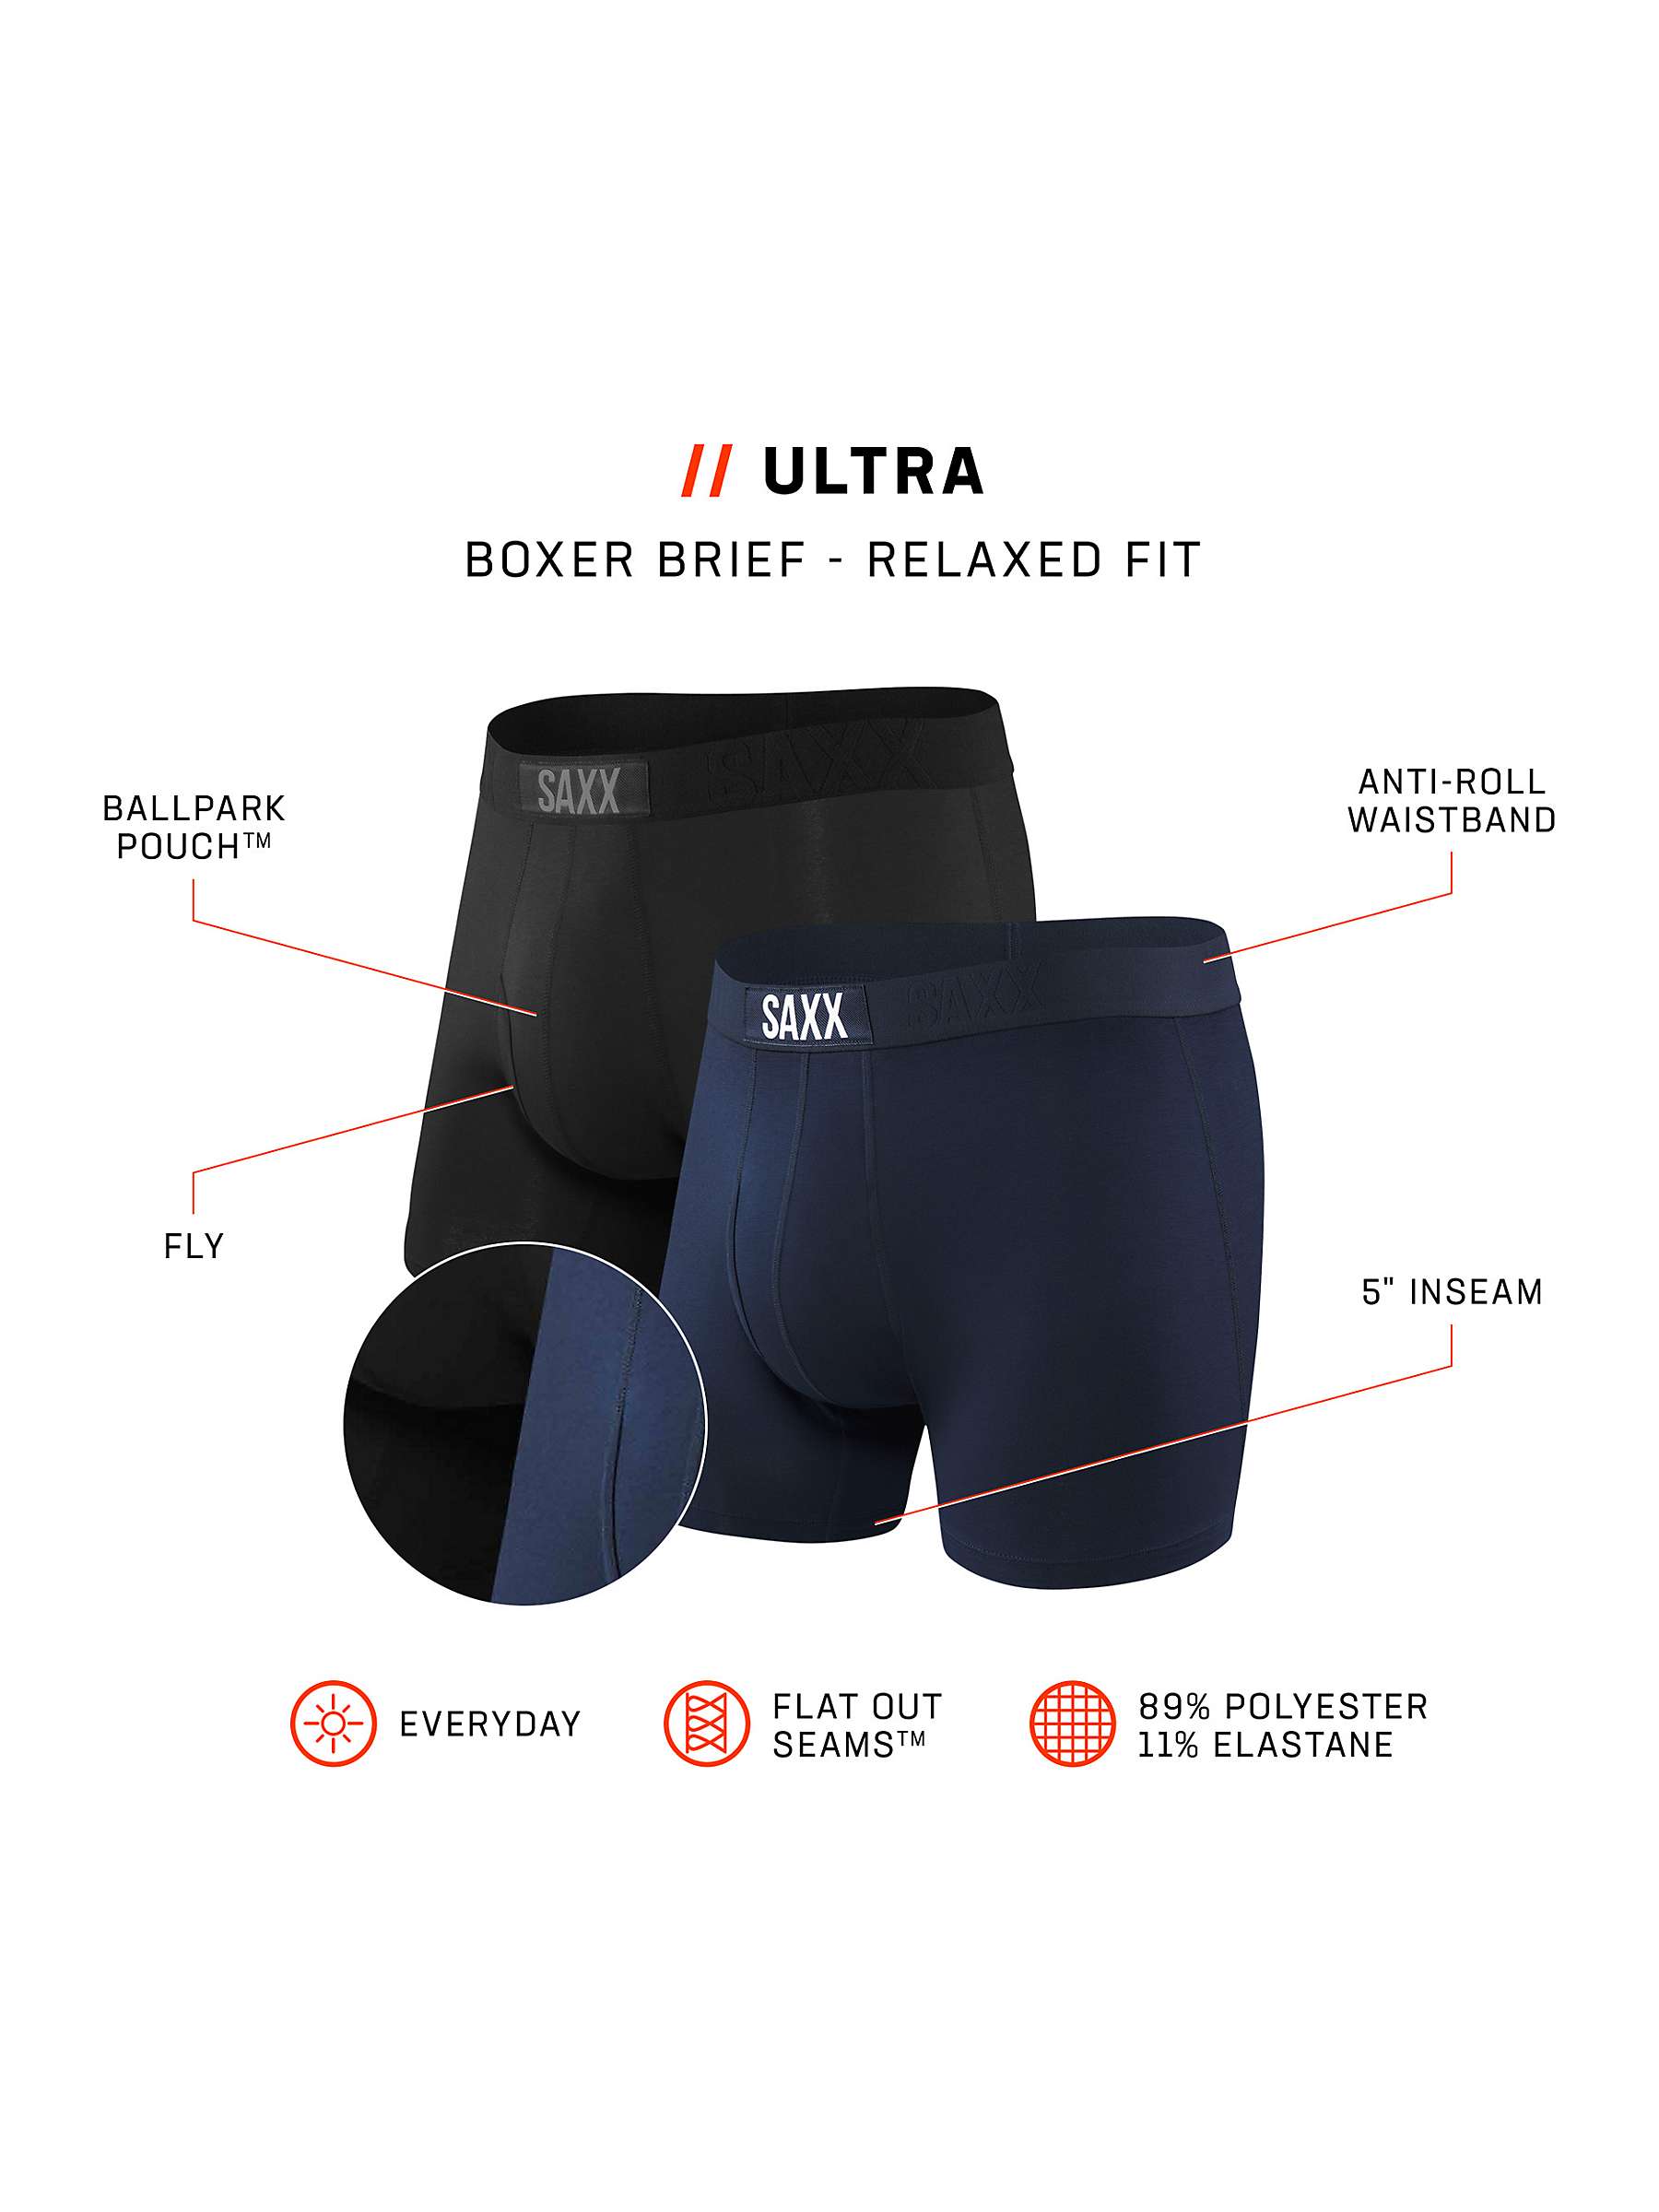 SAXX Ultra Relaxed Fit Trunks, Pack of 2, Black/Navy at John Lewis ...